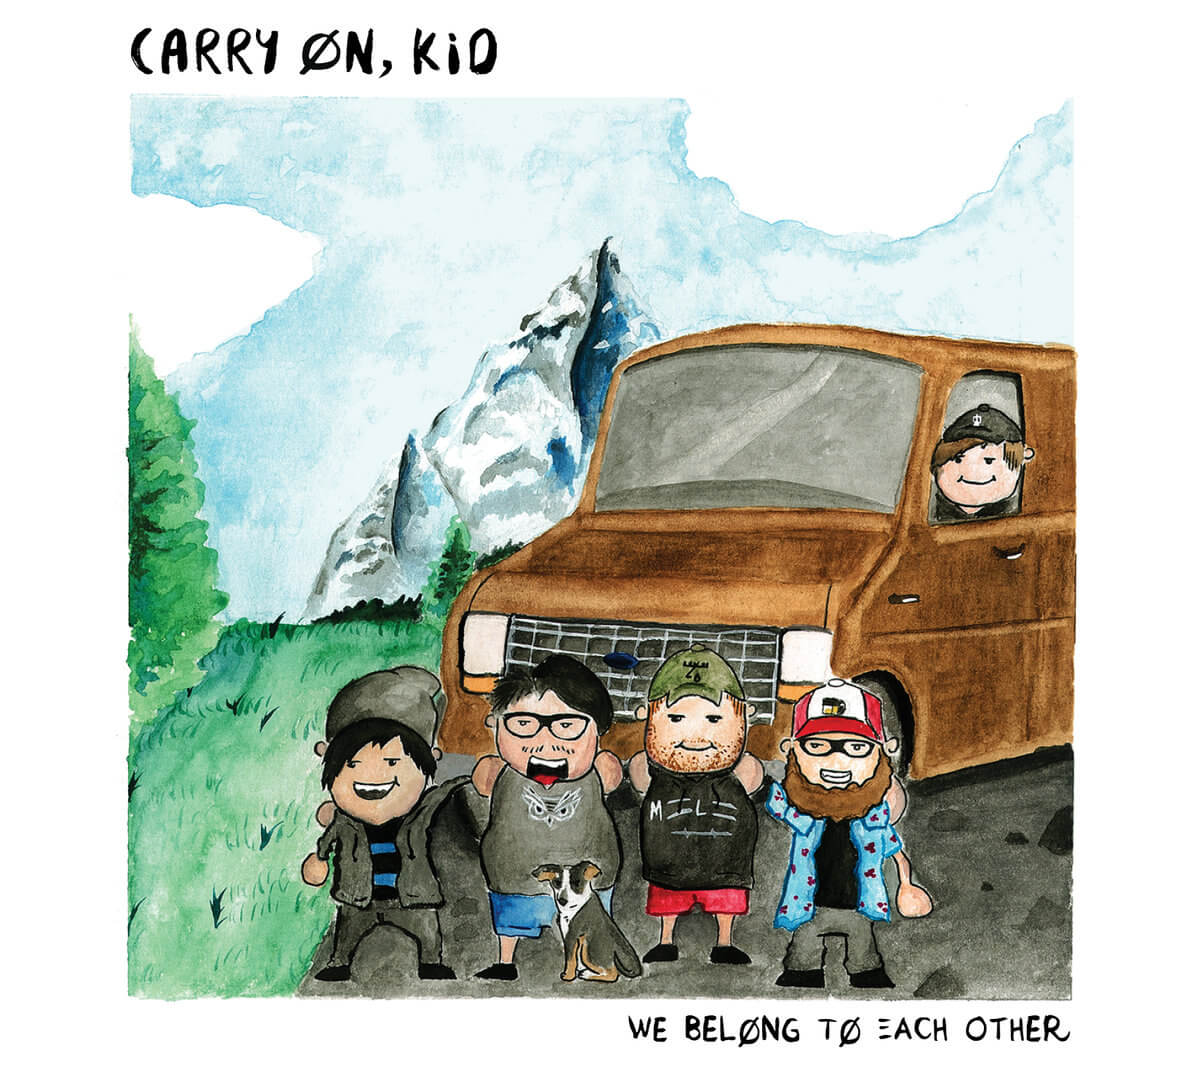 The new album from "Carry On, Kid," We Belong To Each Other.